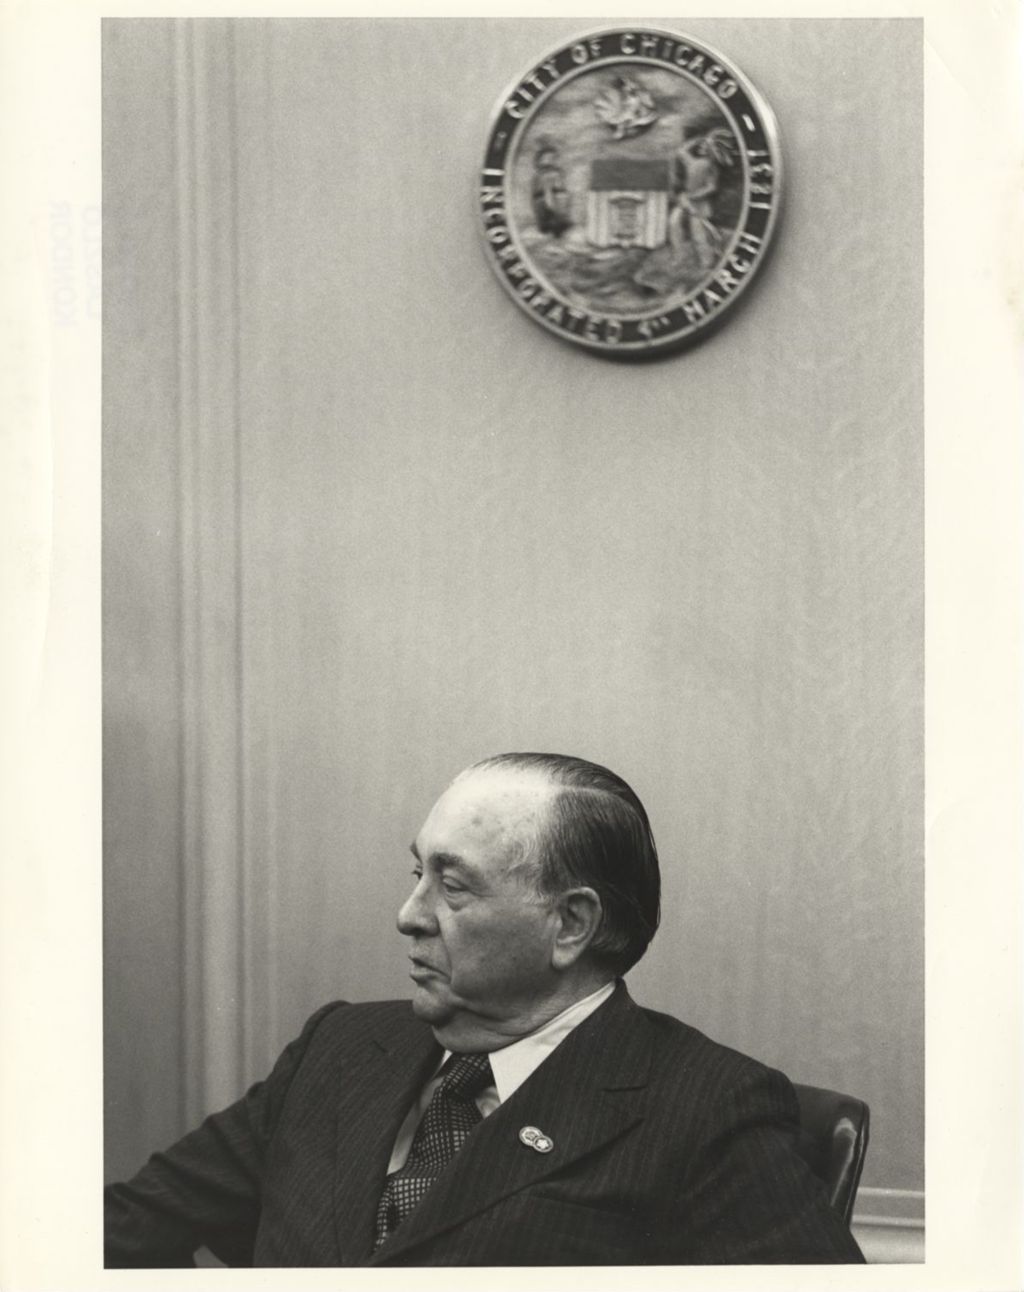 Miniature of Richard J. Daley in his office